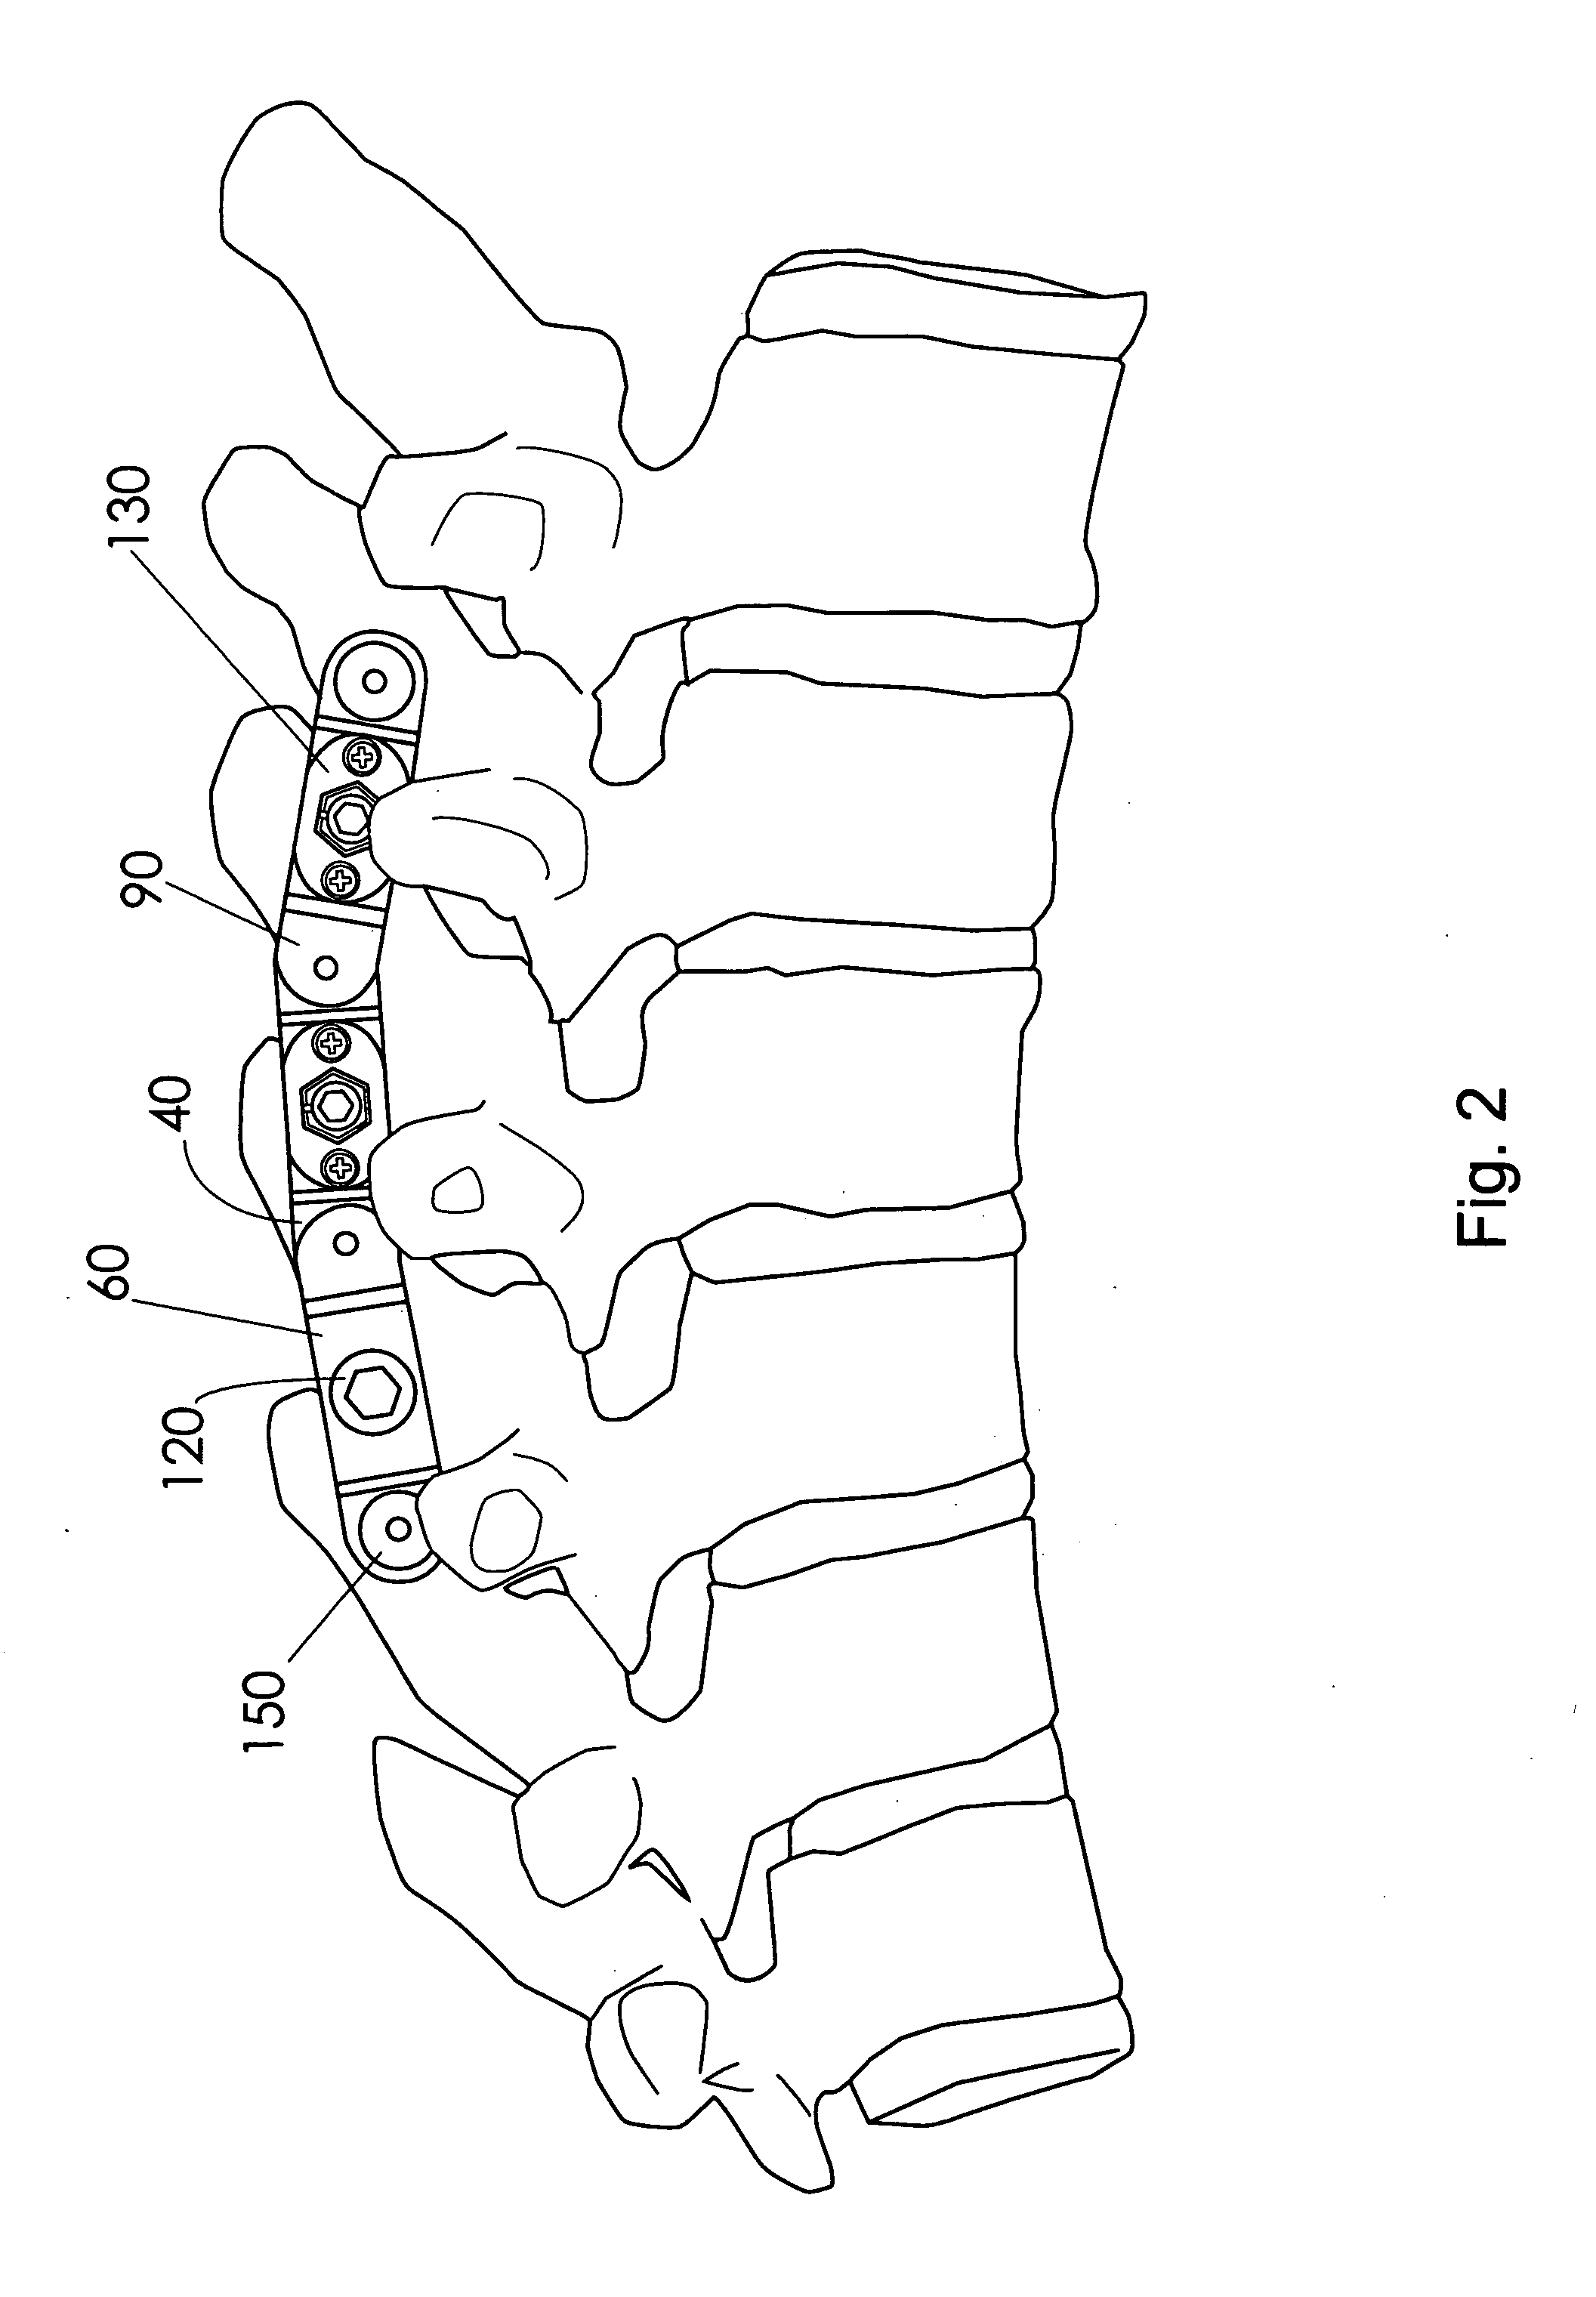 Spinous process stabilization device and method